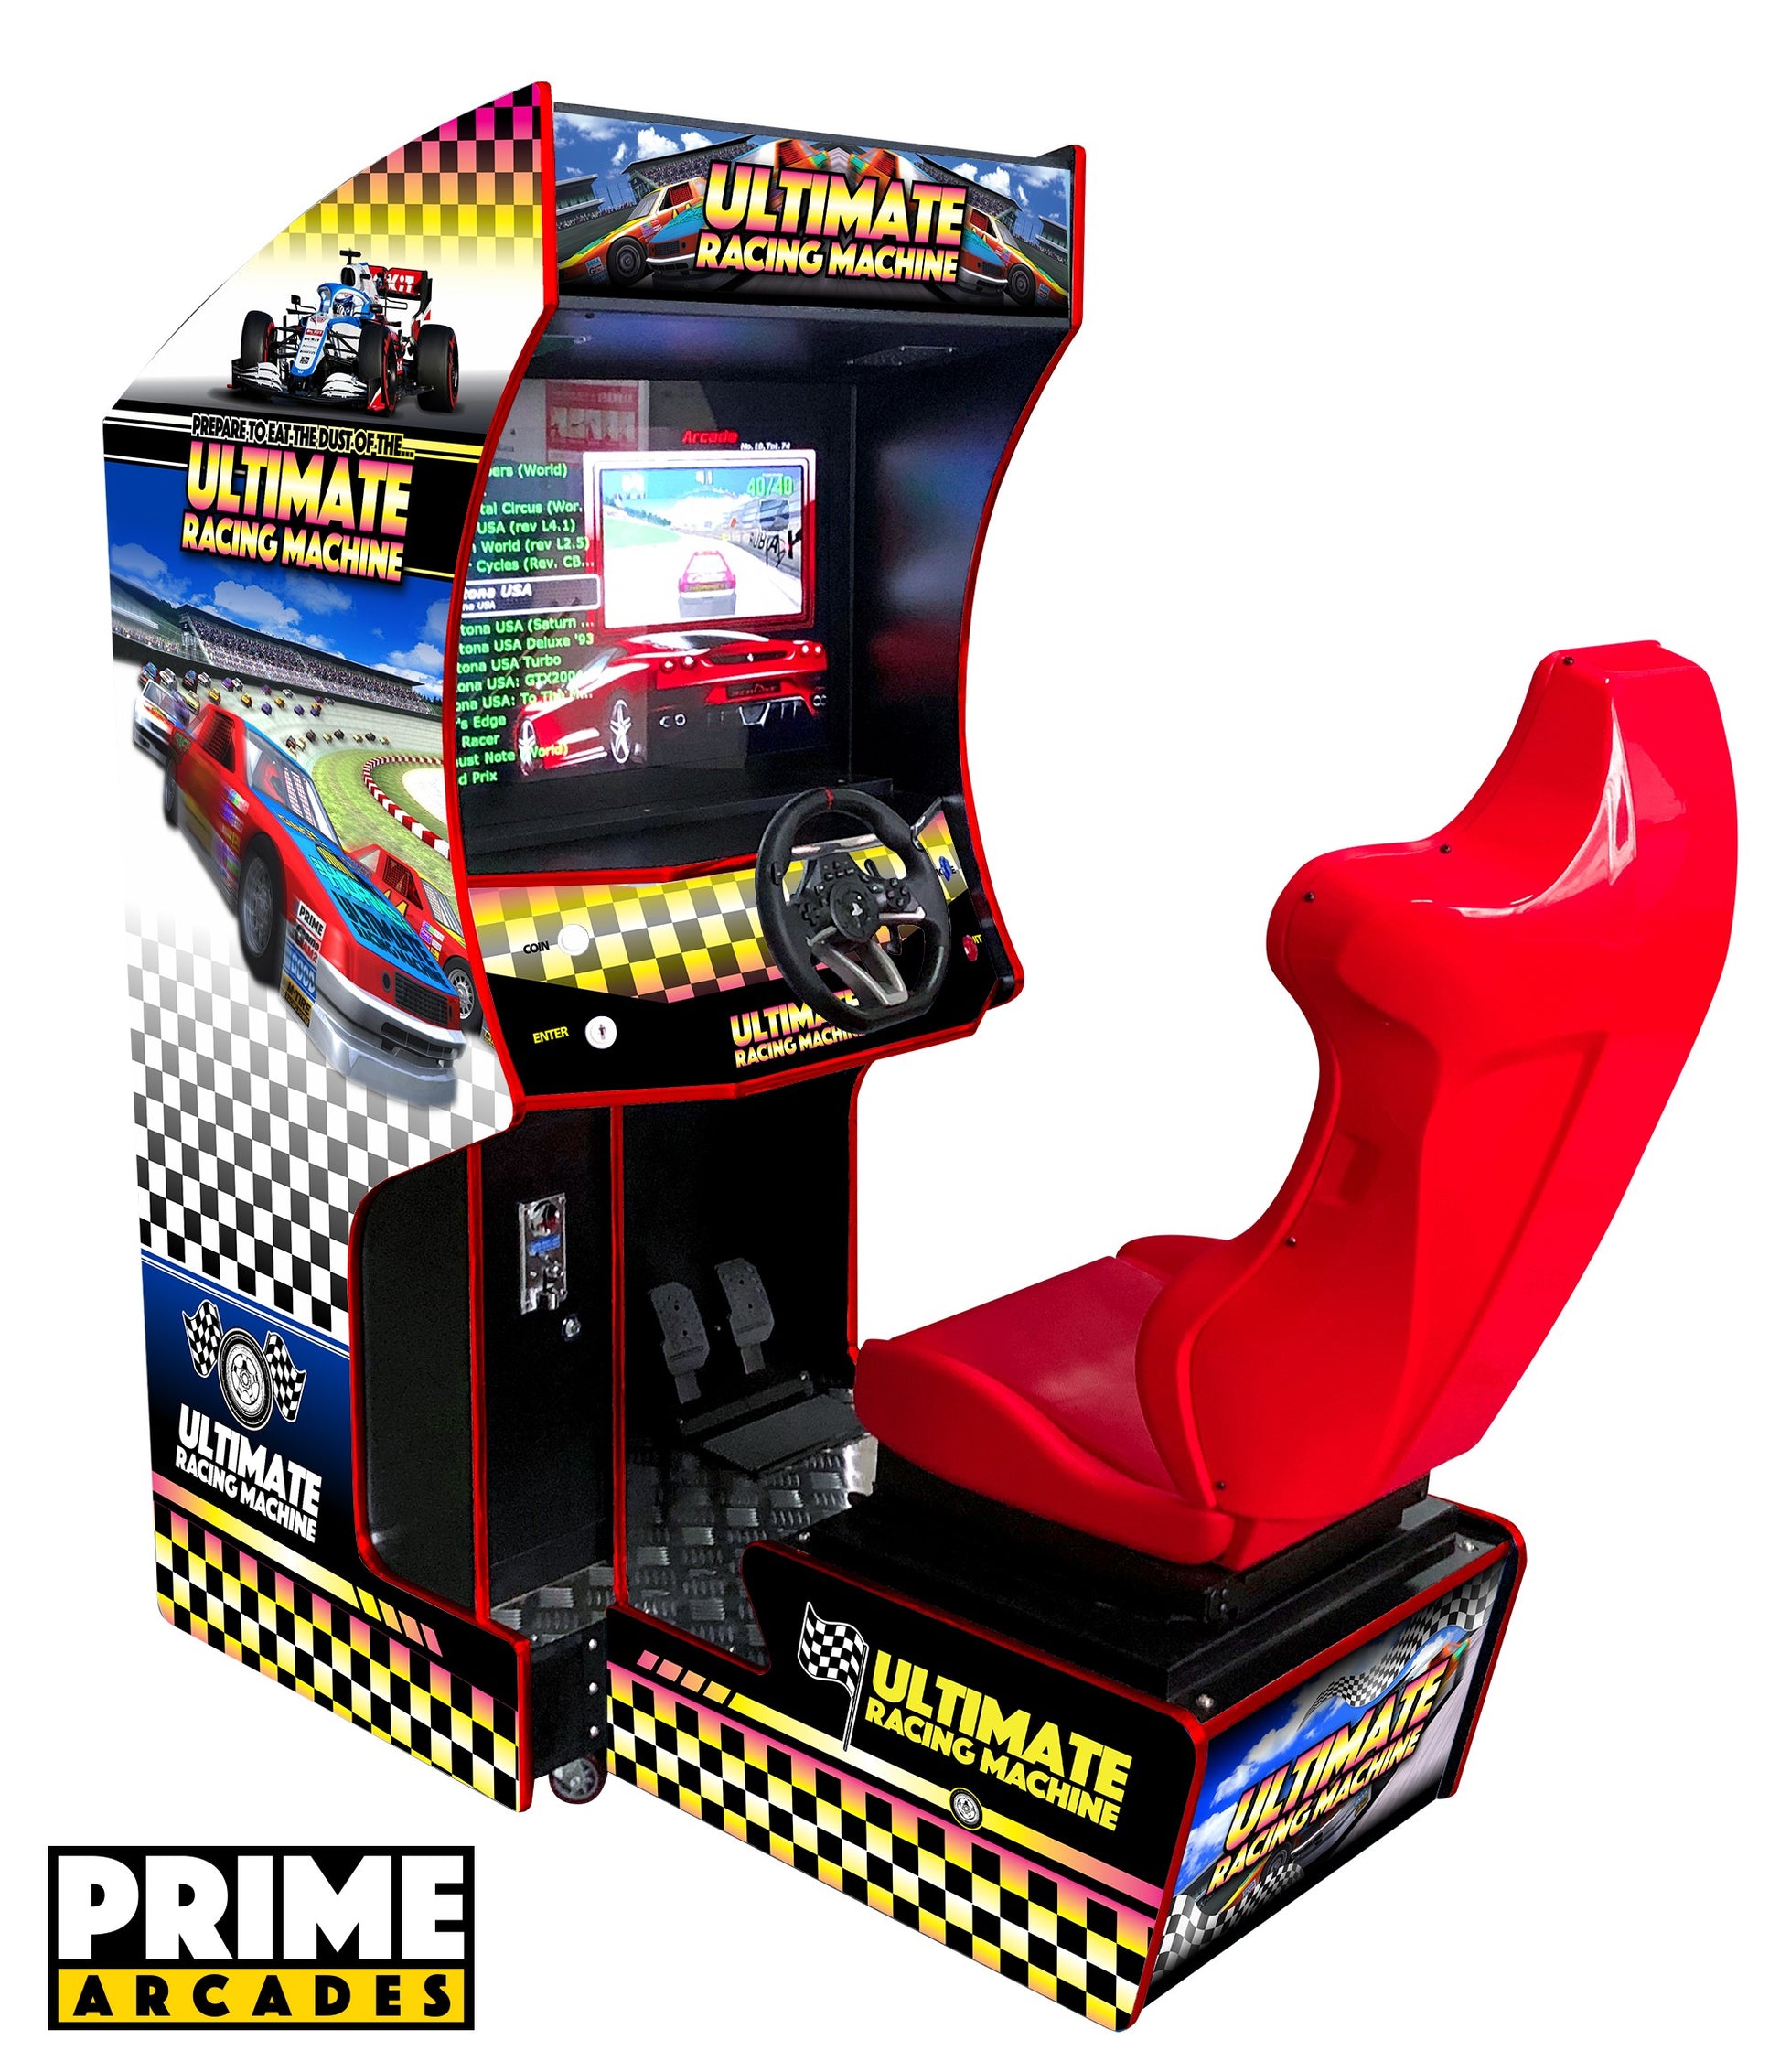 107 Racing Games in 1 Arcade Machine with Seat - Prime Arcades Inc